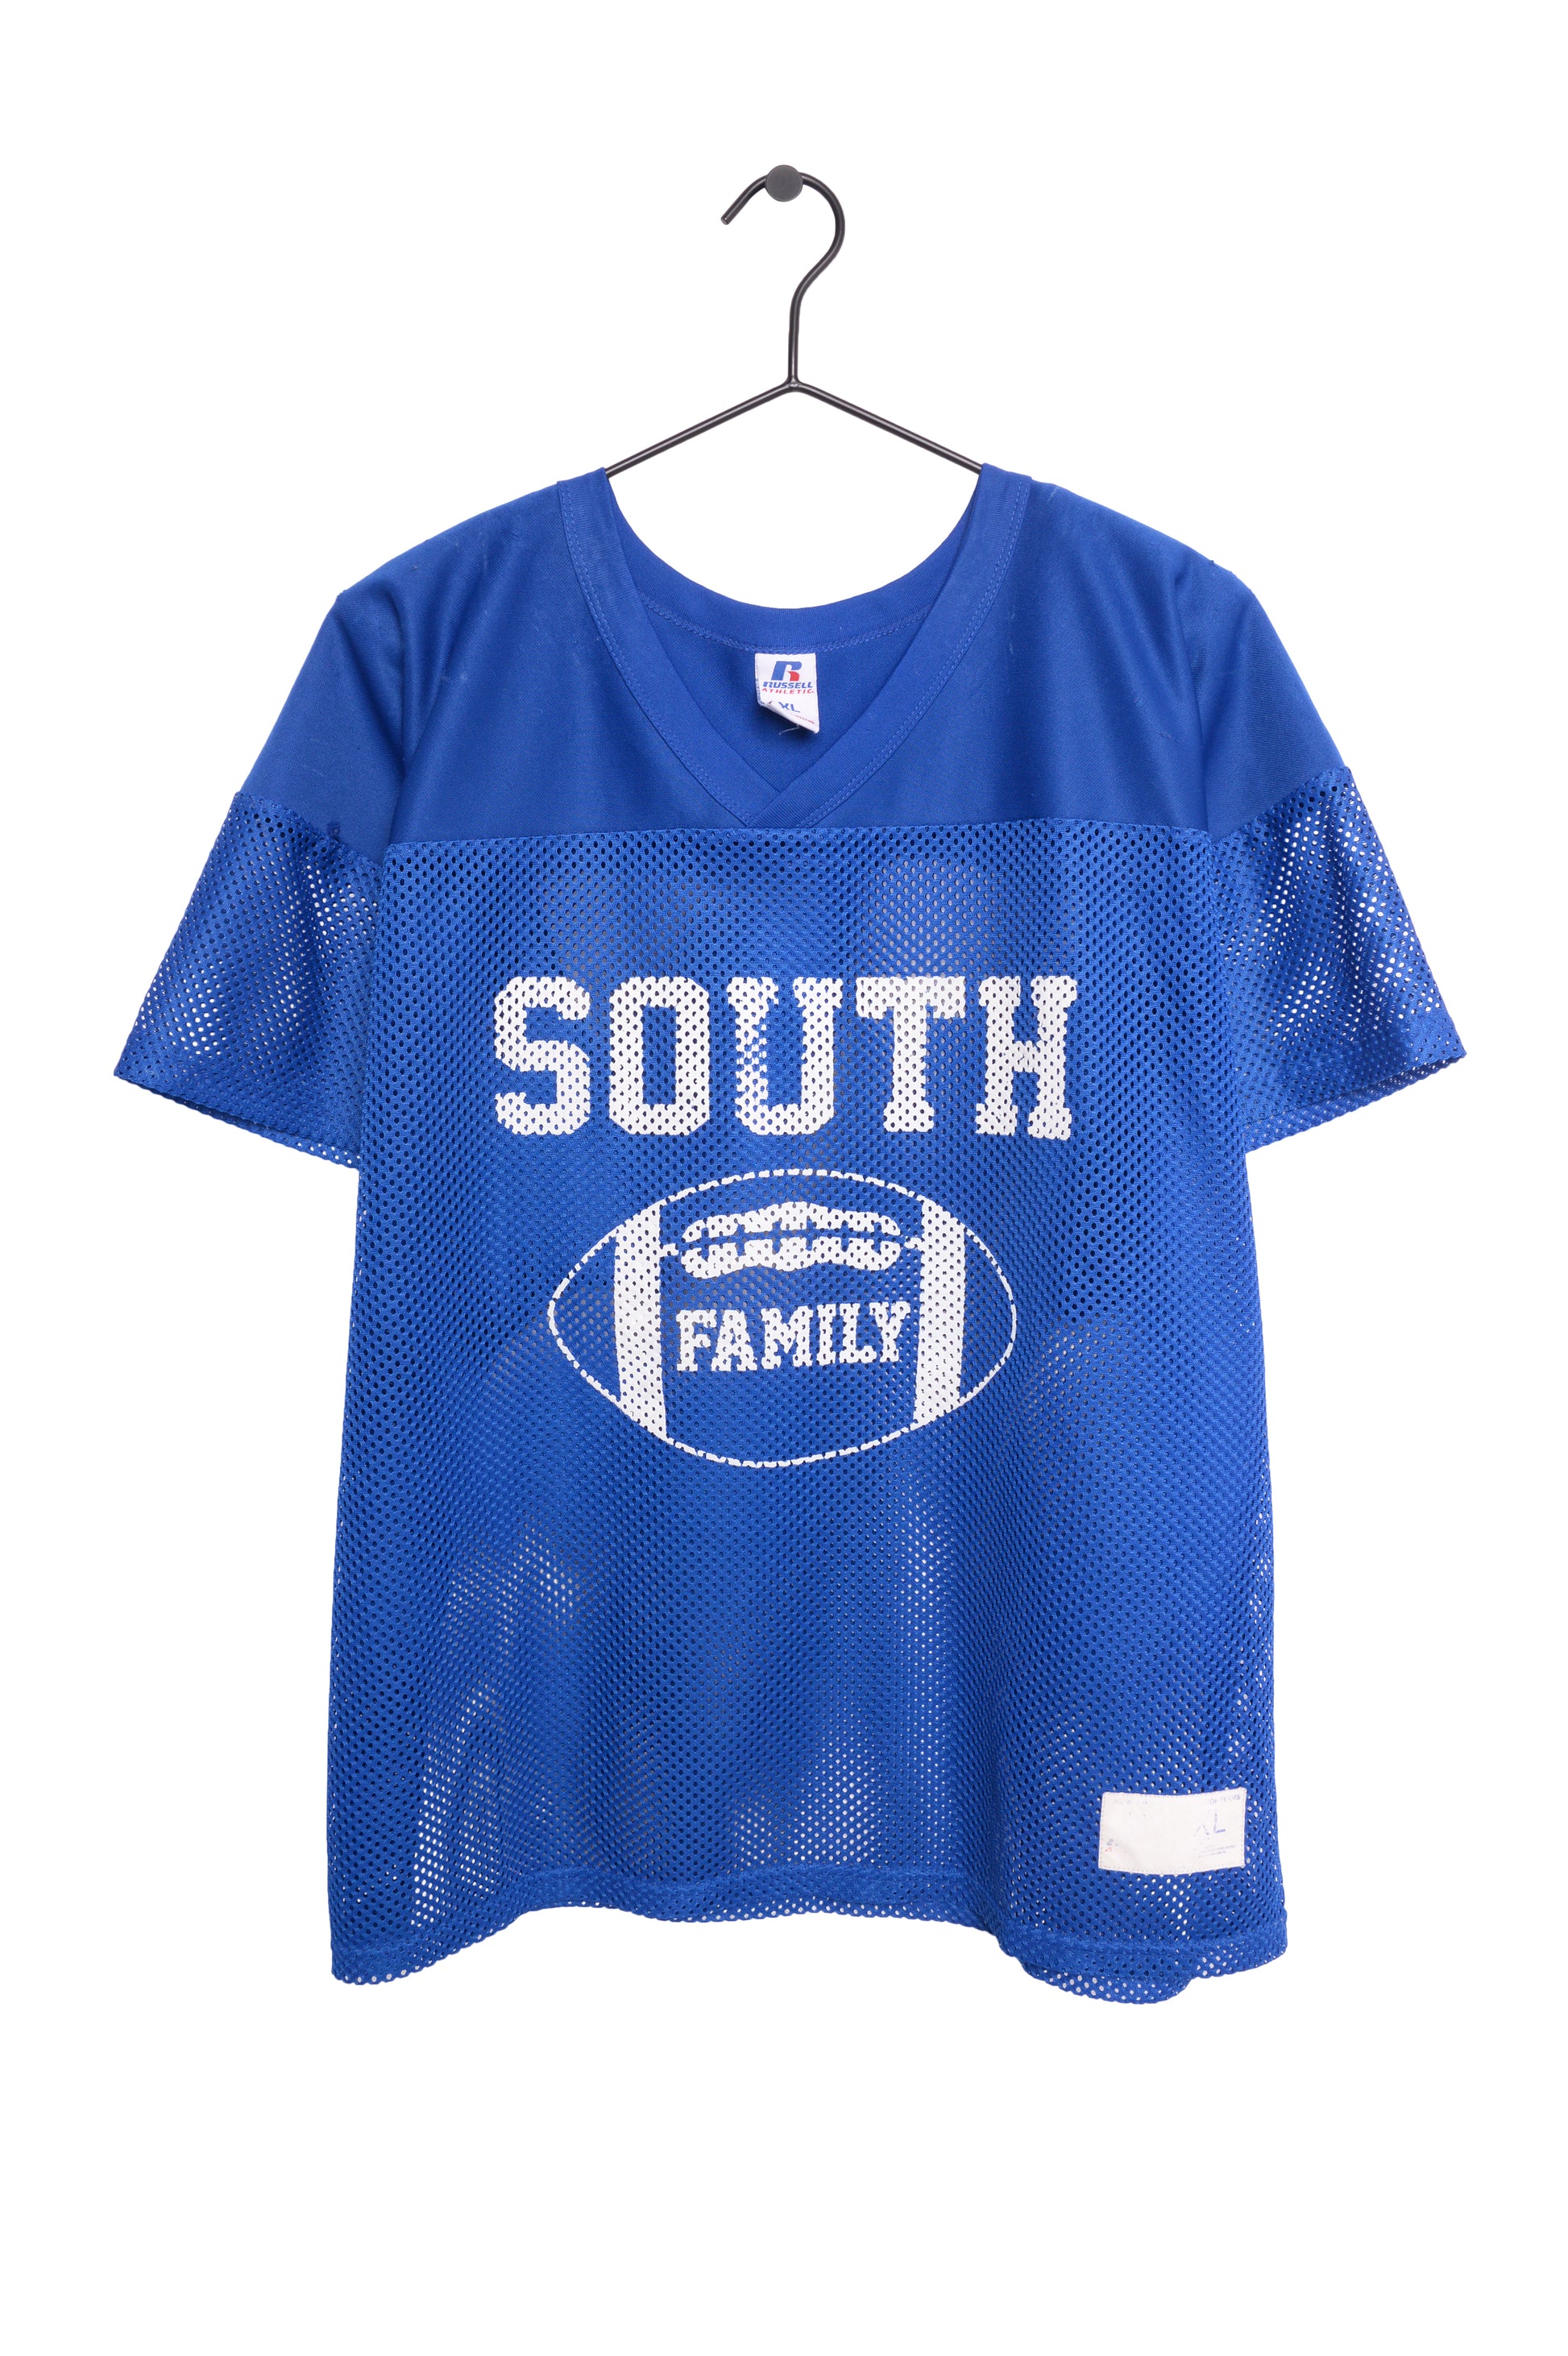 Russel Family Football Jersey Free Shipping - The Vintage Twin